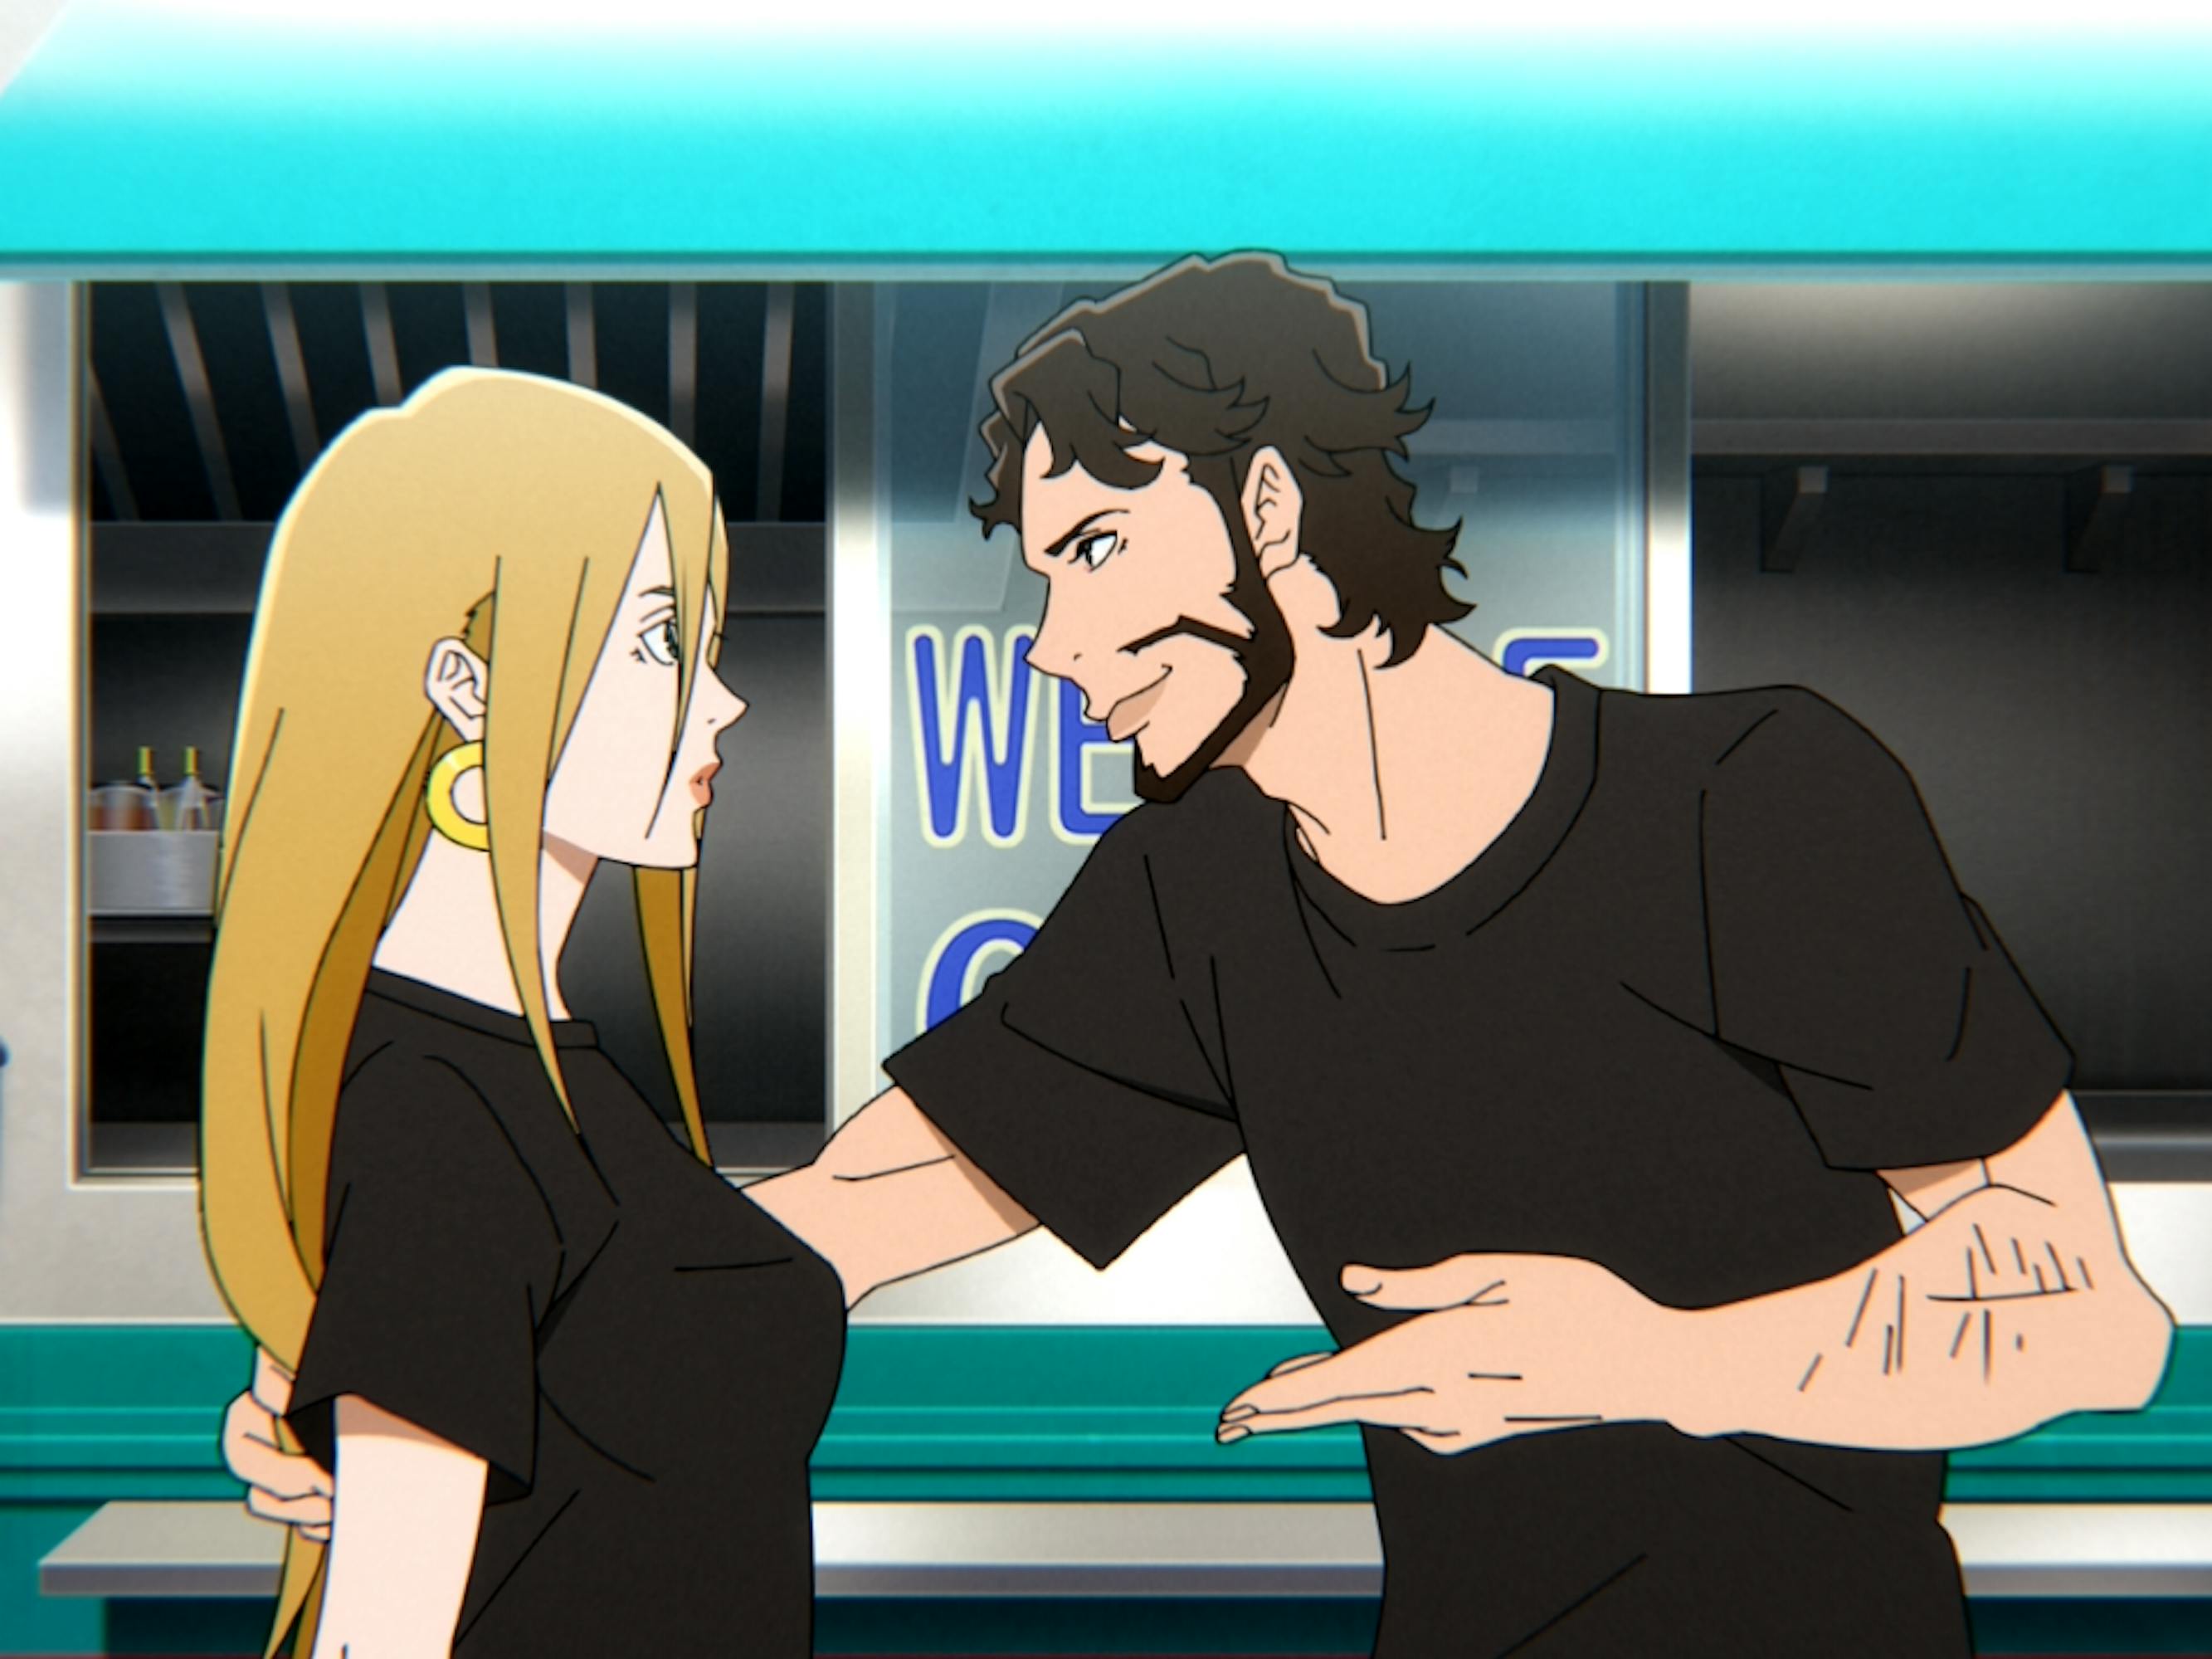 A blond woman and dark haired man wear black t-shirts and stand outside a storefront with a turquoise awning.